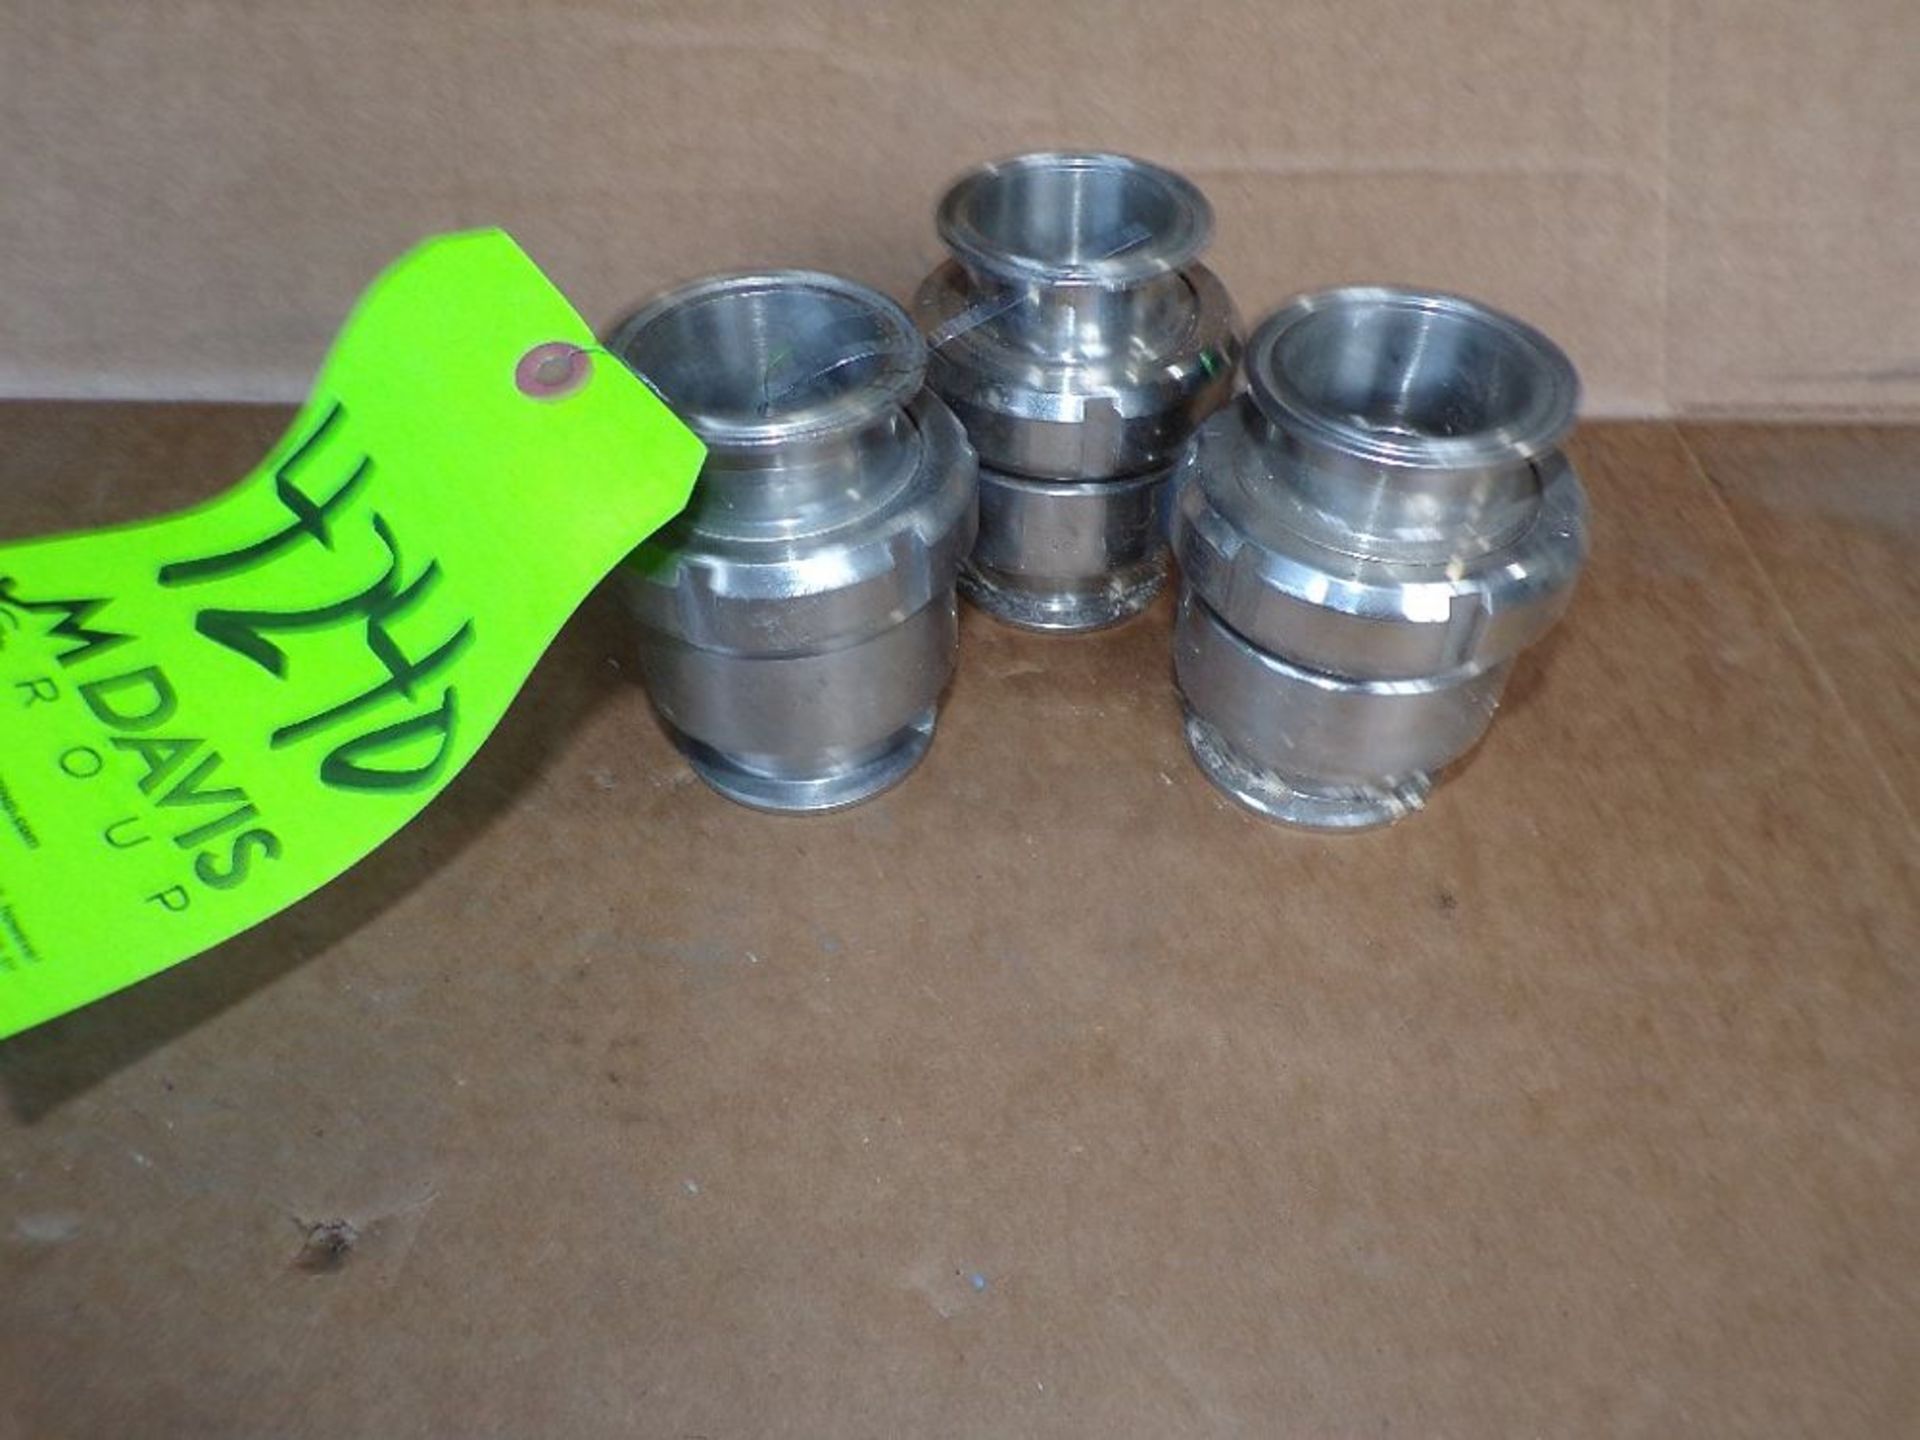 Qty (3) All Stainless steel 2 inch Sanitary Check Valves